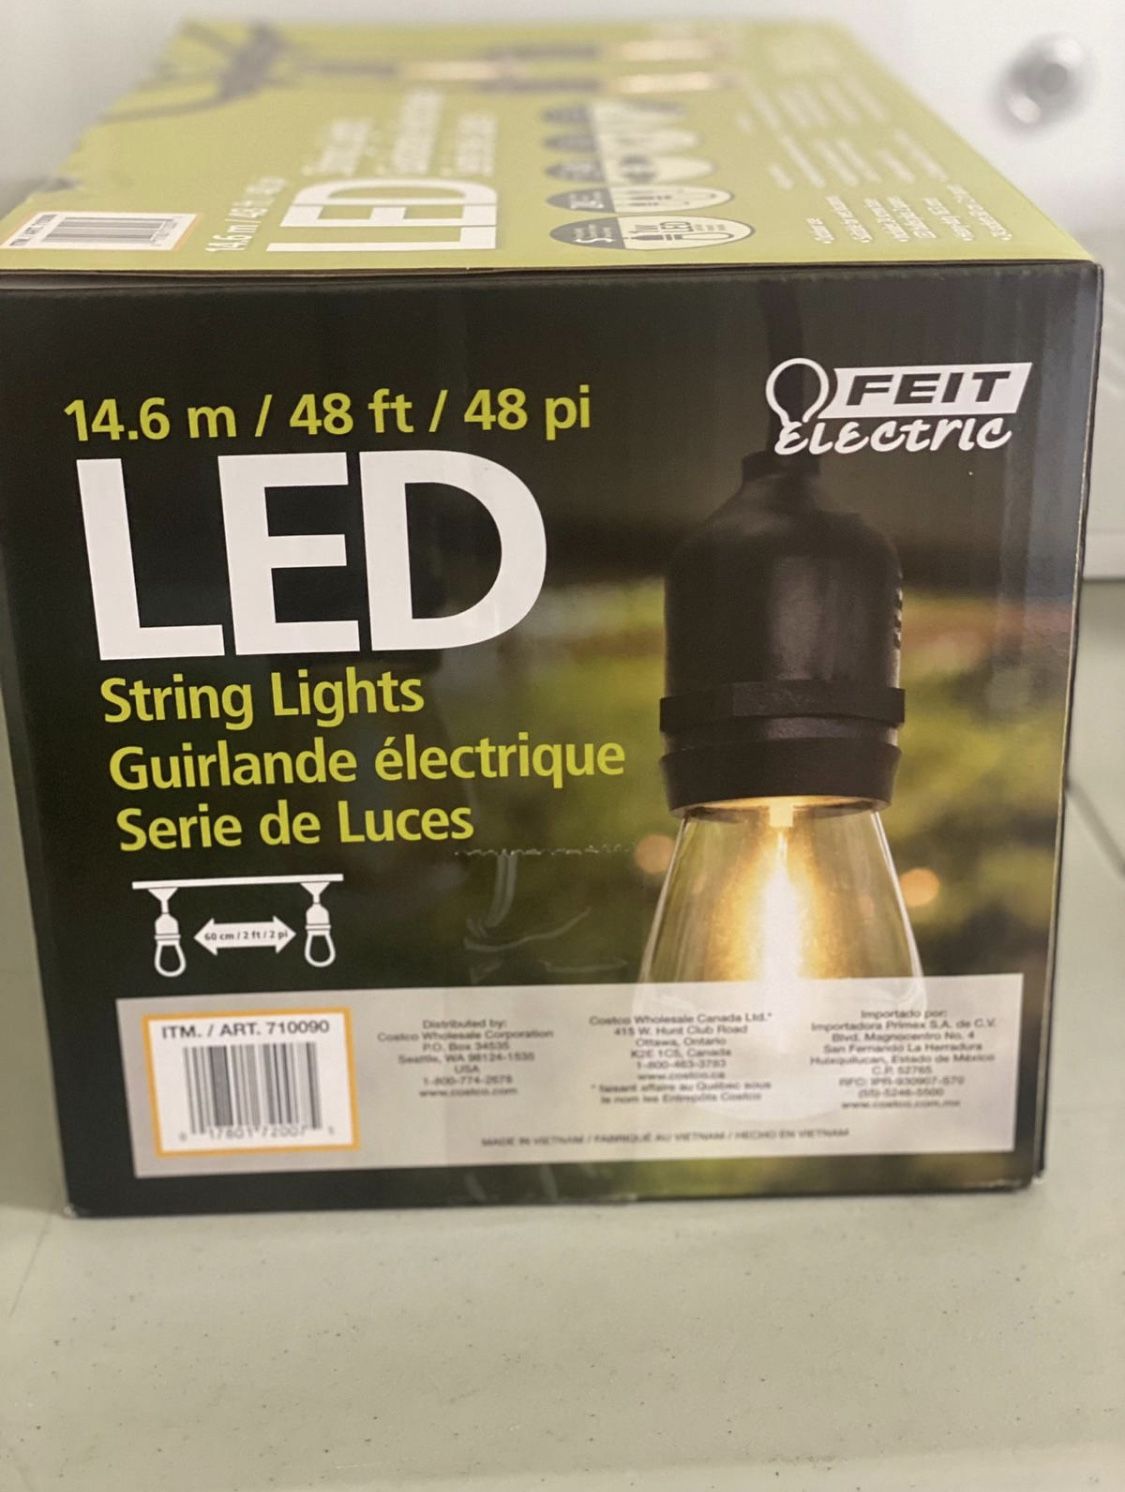 Feit Electric 48ft LED String Light $34.99 for Sale in Chino Hills, CA  OfferUp